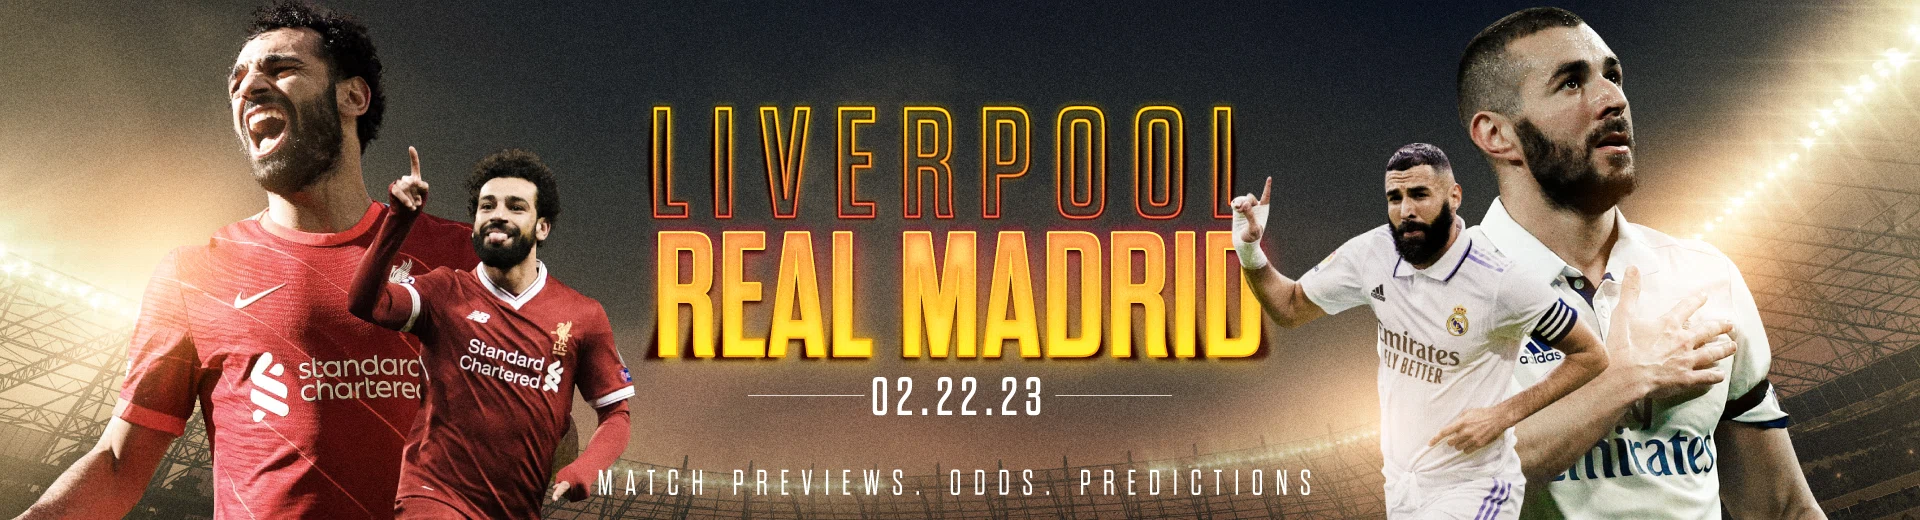 Liverpool vs. Real Madrid 02/22/2023 | Match Previews, Odds, and Predictions